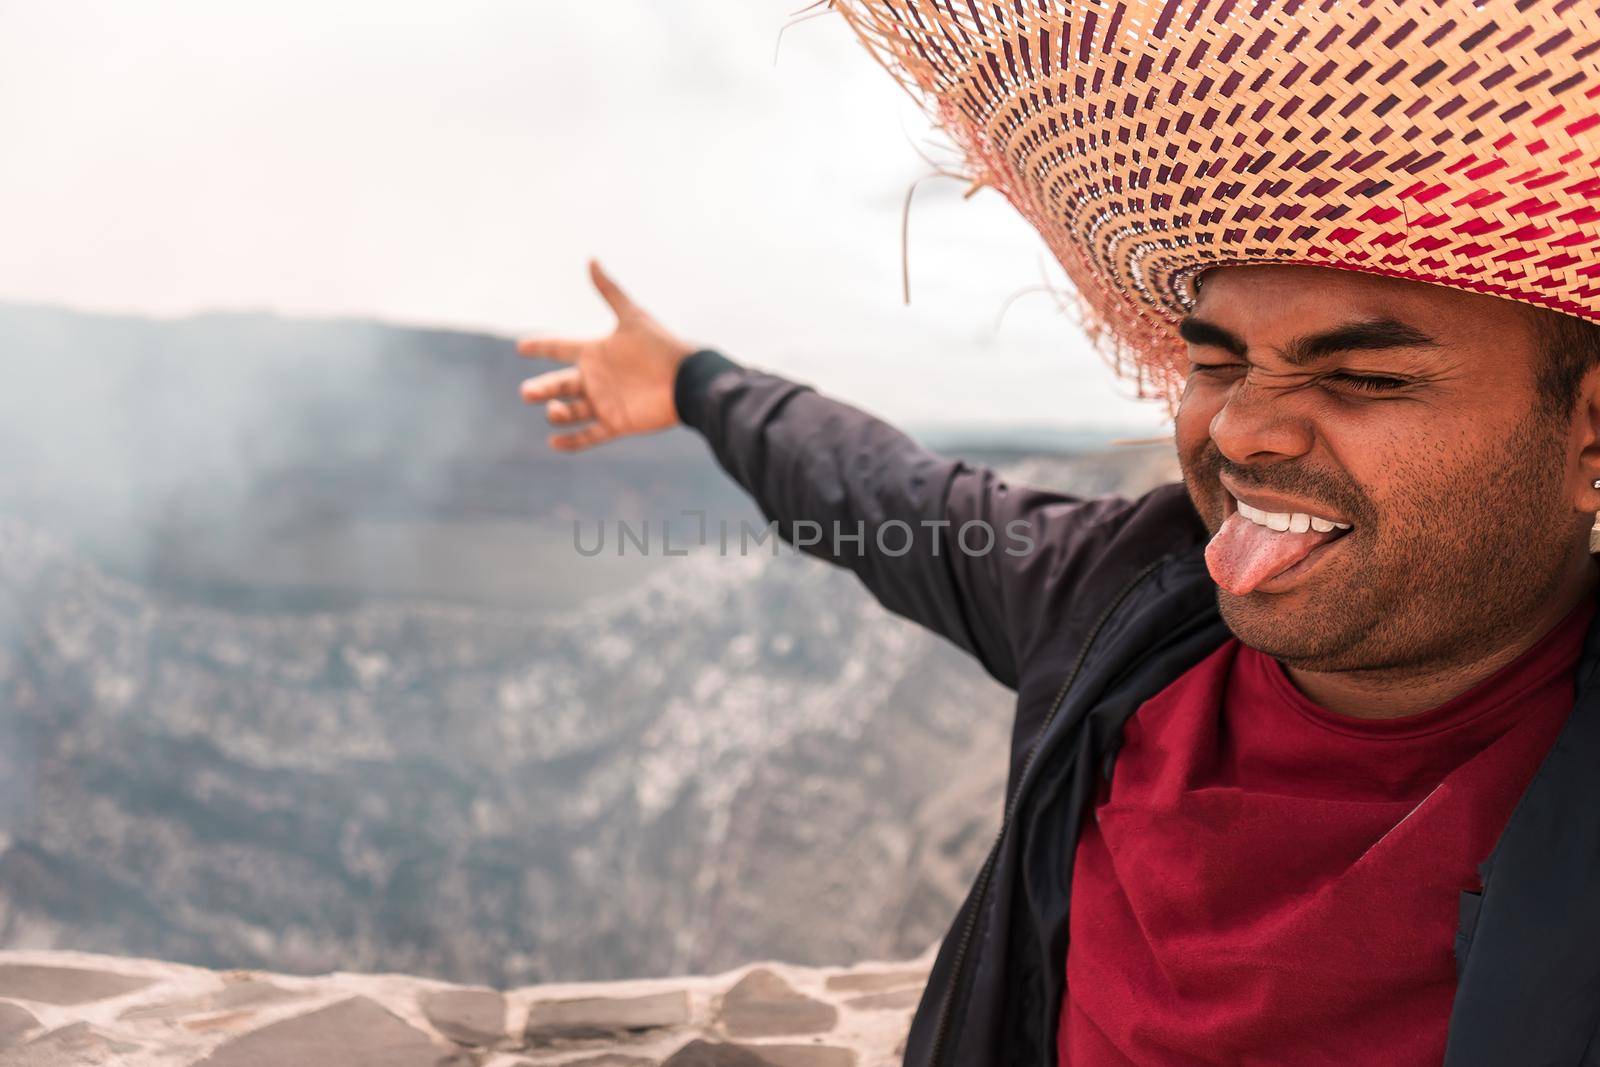 Latin man with a small three-day beard wearing a striking hat and sticking out his tongue pointing towards the crater of a volcano during an adventure trip in Masaya, Nicaragua.